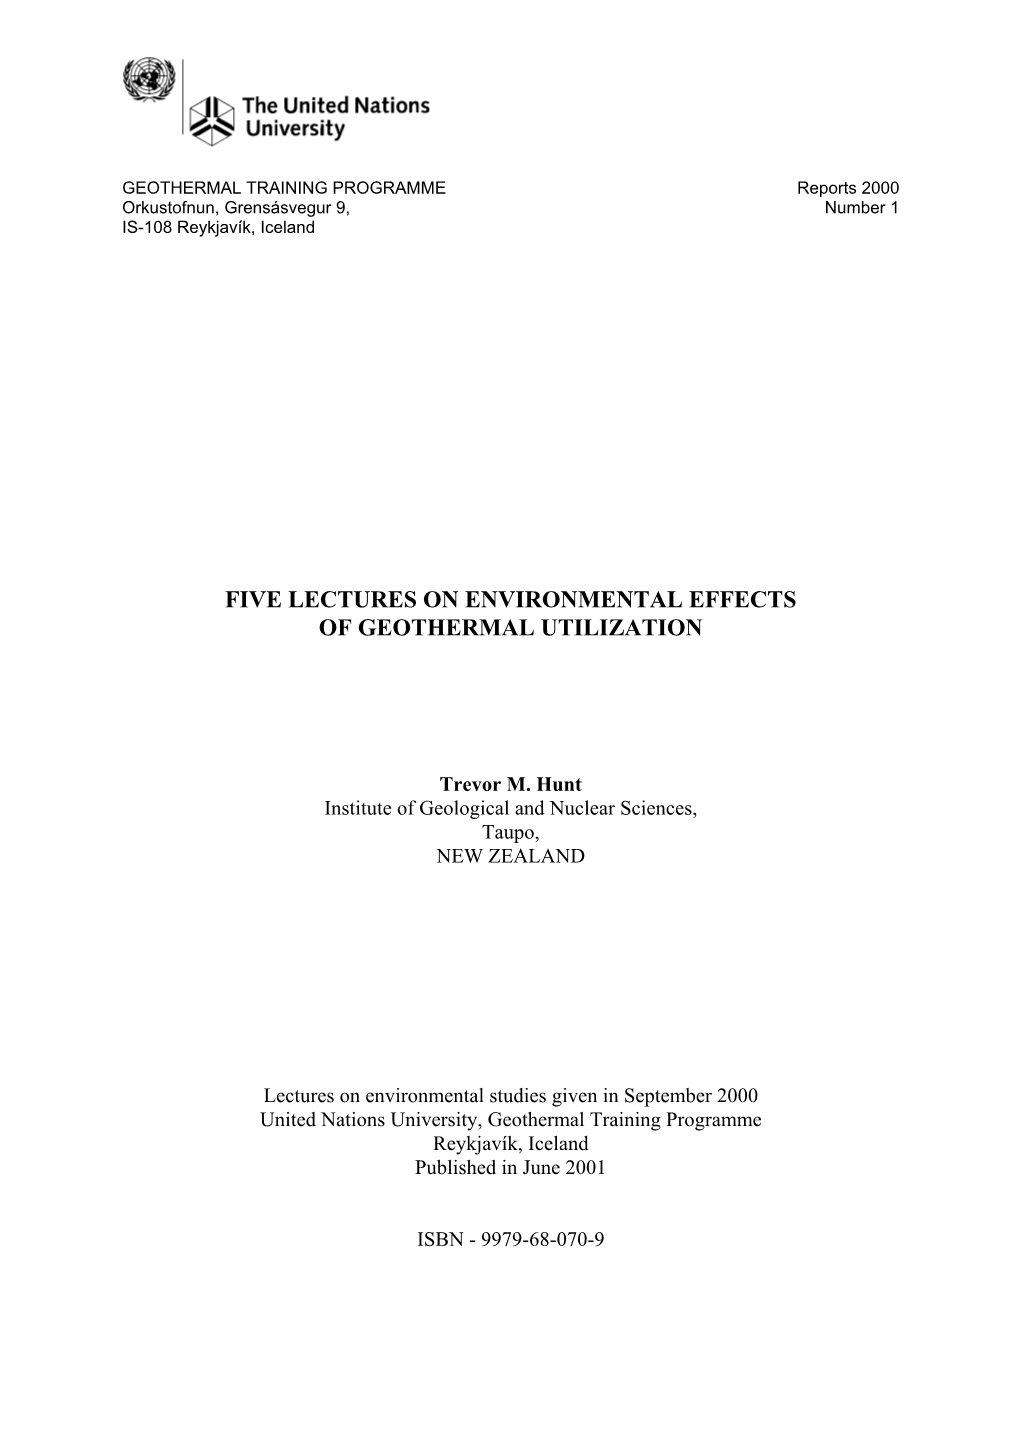 Five Lectures on Environmental Effects of Geothermal Utilization